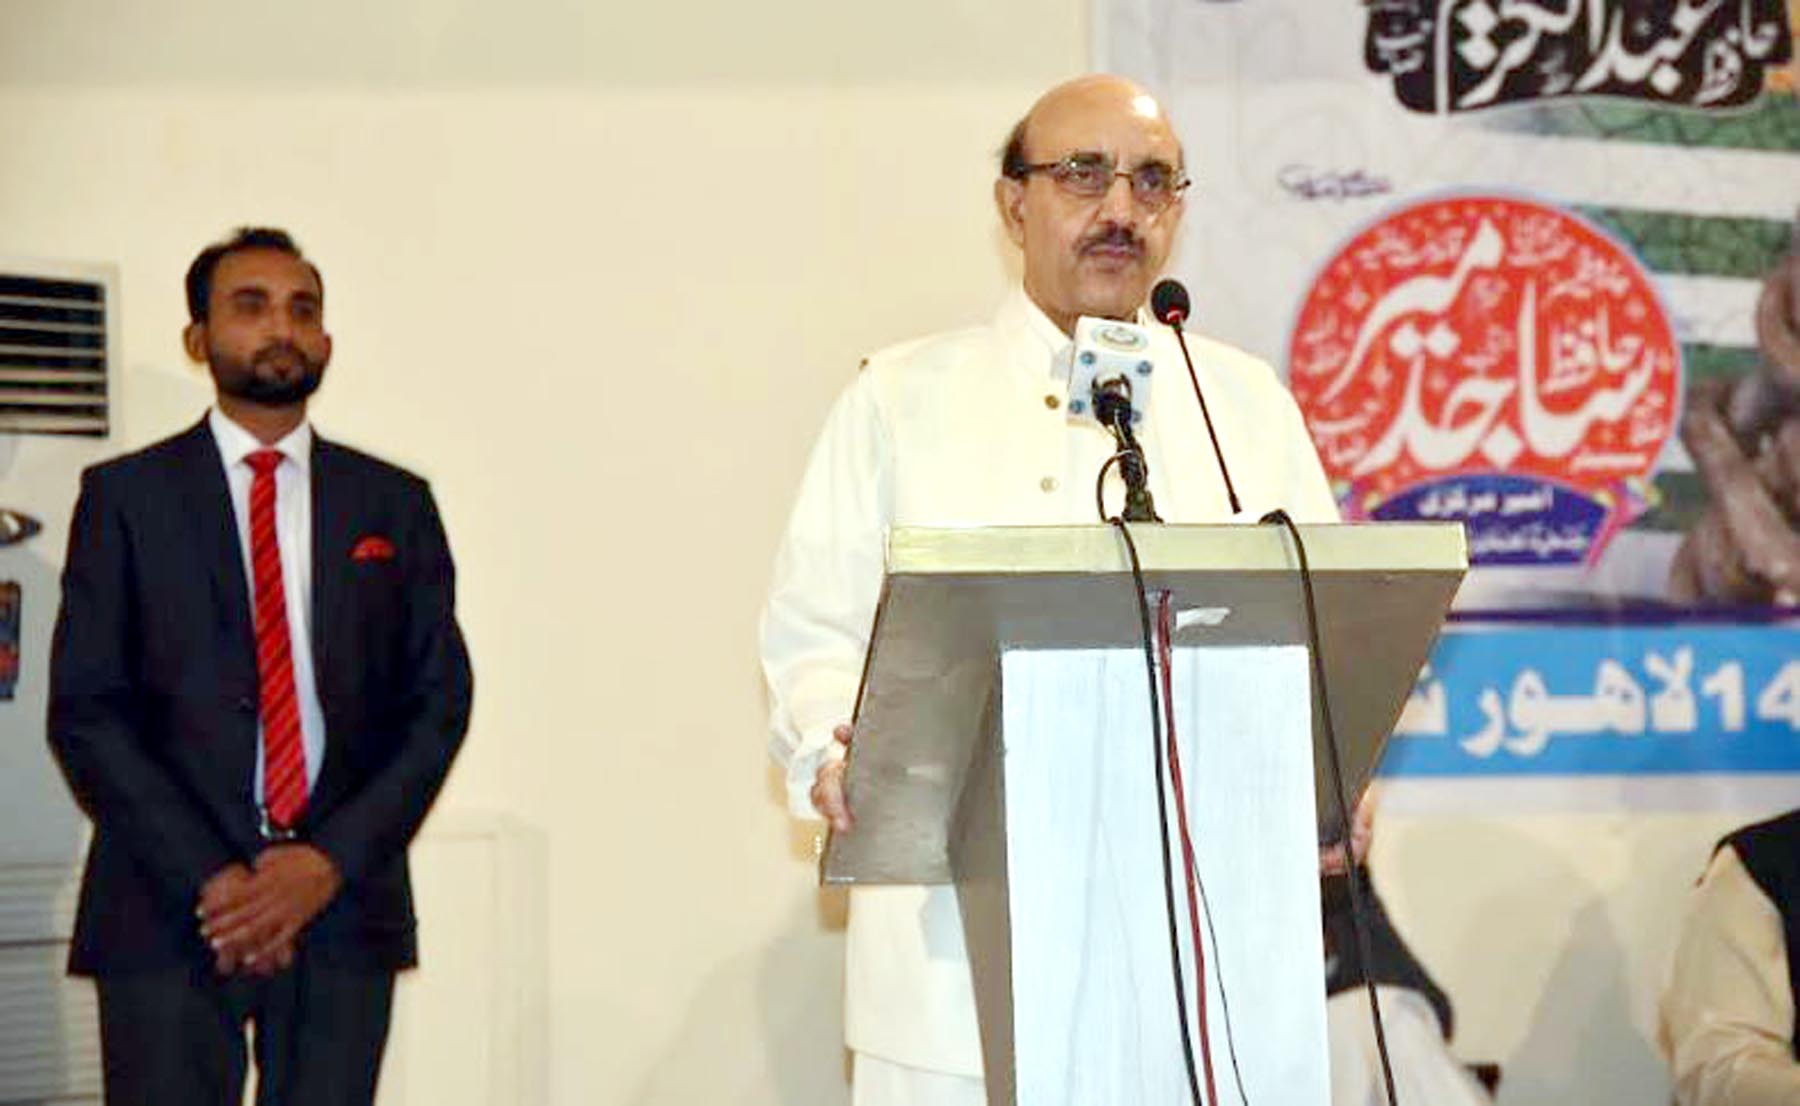 Indian threats against AJK, Pakistan cannot be overlooked: AJK President